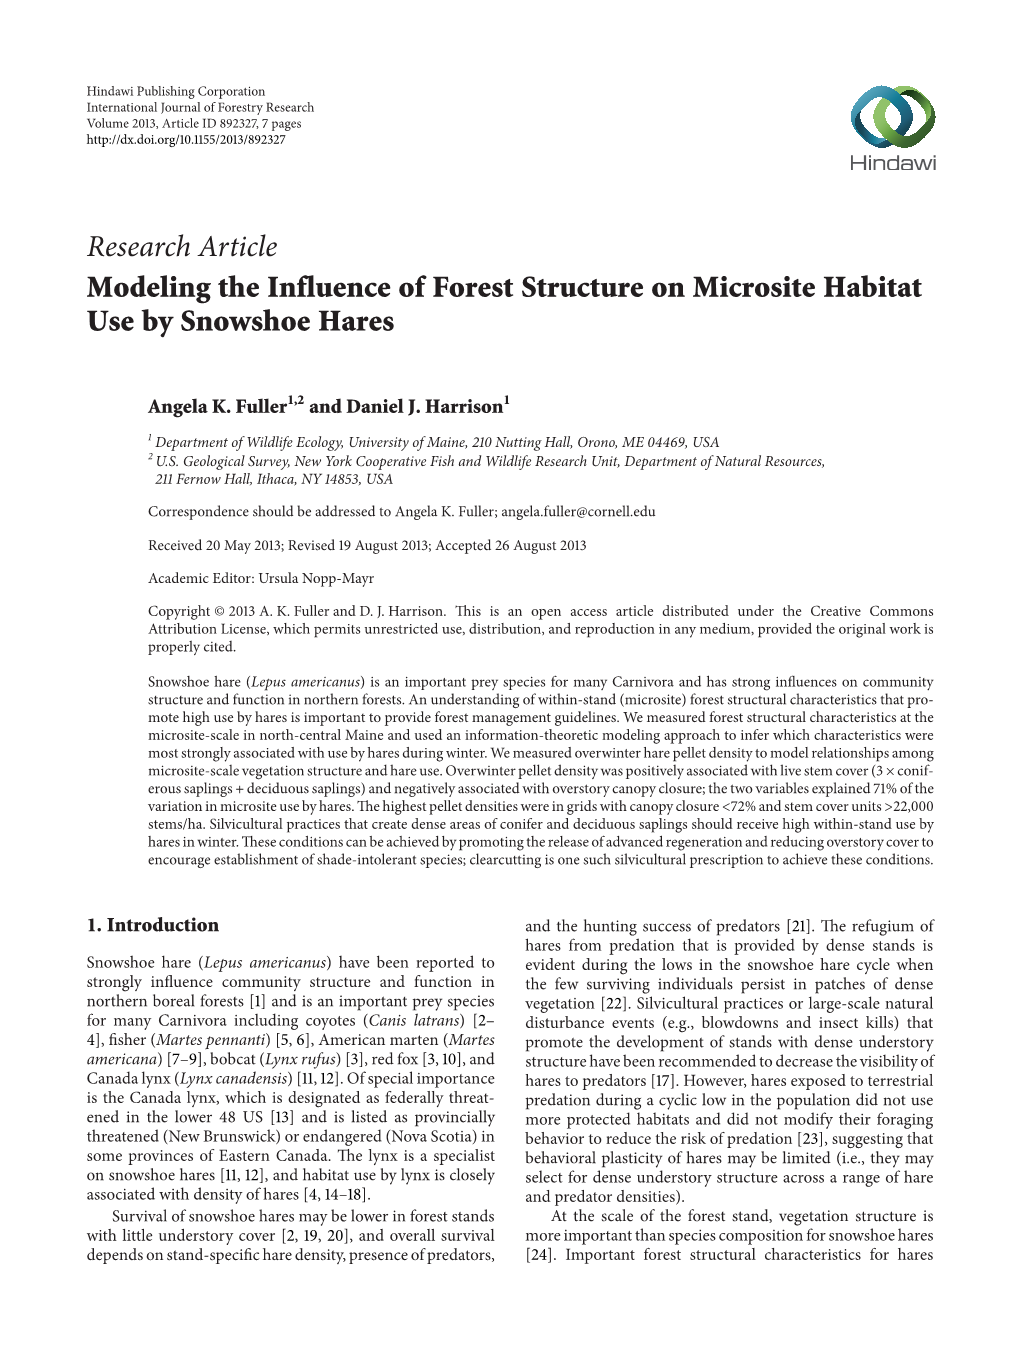 Modeling the Influence of Forest Structure on Microsite Habitat Use by Snowshoe Hares